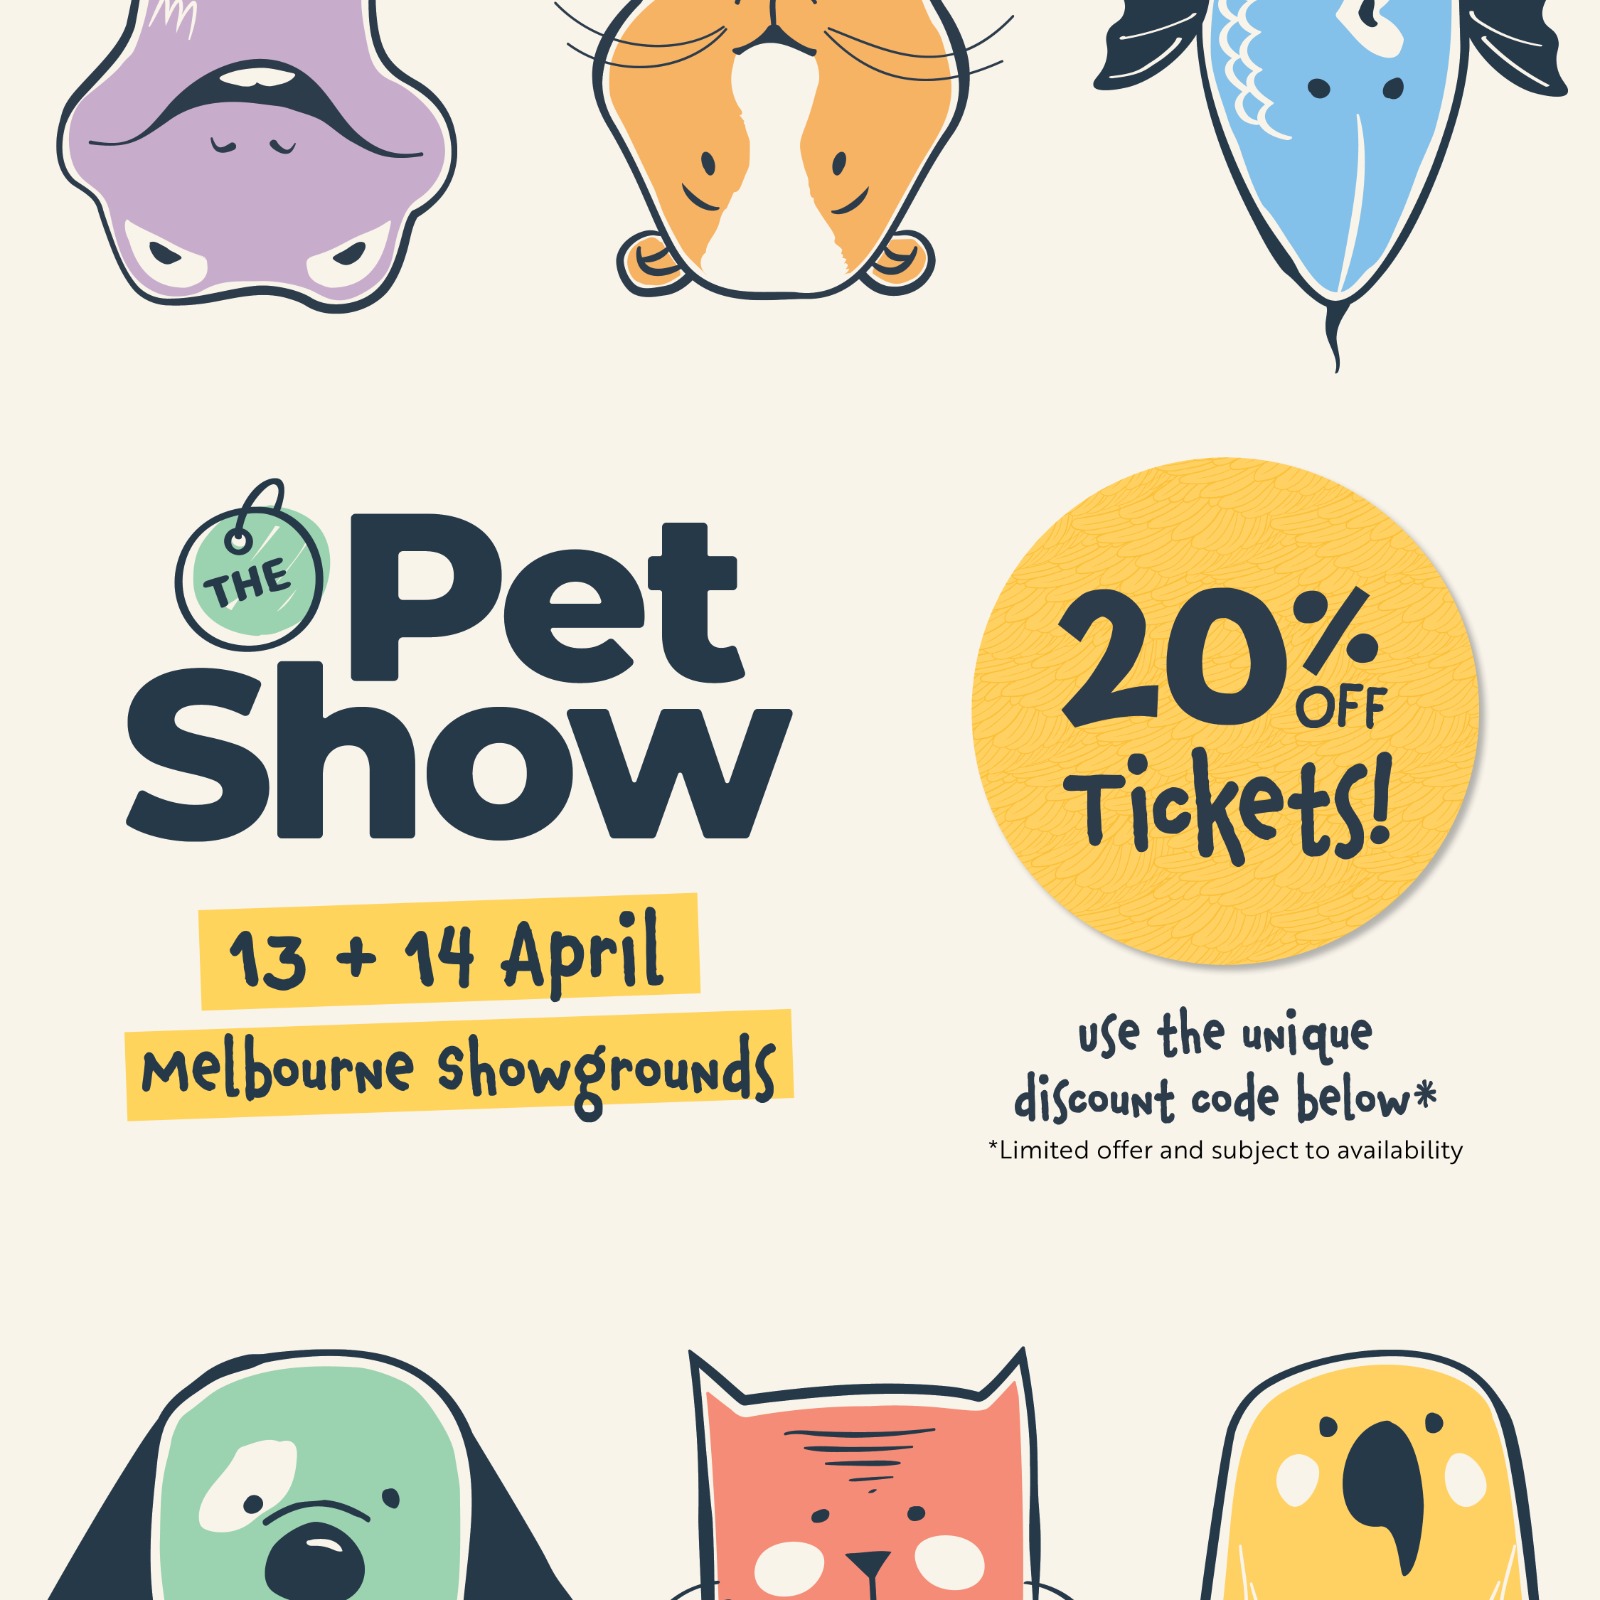 Unleash the Wagging at The Pet Show Melbourne 2024 with Bark with Buster! Calling all Melbourne paw-rents! Get ready to spoil your furry best friend at The Pet Show Melbourne 2024 with Bark with Buster, Australia's favourite natural dog treat brand! Mark Your Calendar & Head to Stand D53! Sat 13th & Sun 14th April 2024 and for our Furry Followers we've got a special discount code just for YOU to pre-purchase your tickets to The Pet Show Melbourne 2024! Use code FJX7S6 at checkout for savings you'll love! We'll be there in full force, ready to share the Bark with Buster love (and some drool-worthy treats) with your pup.